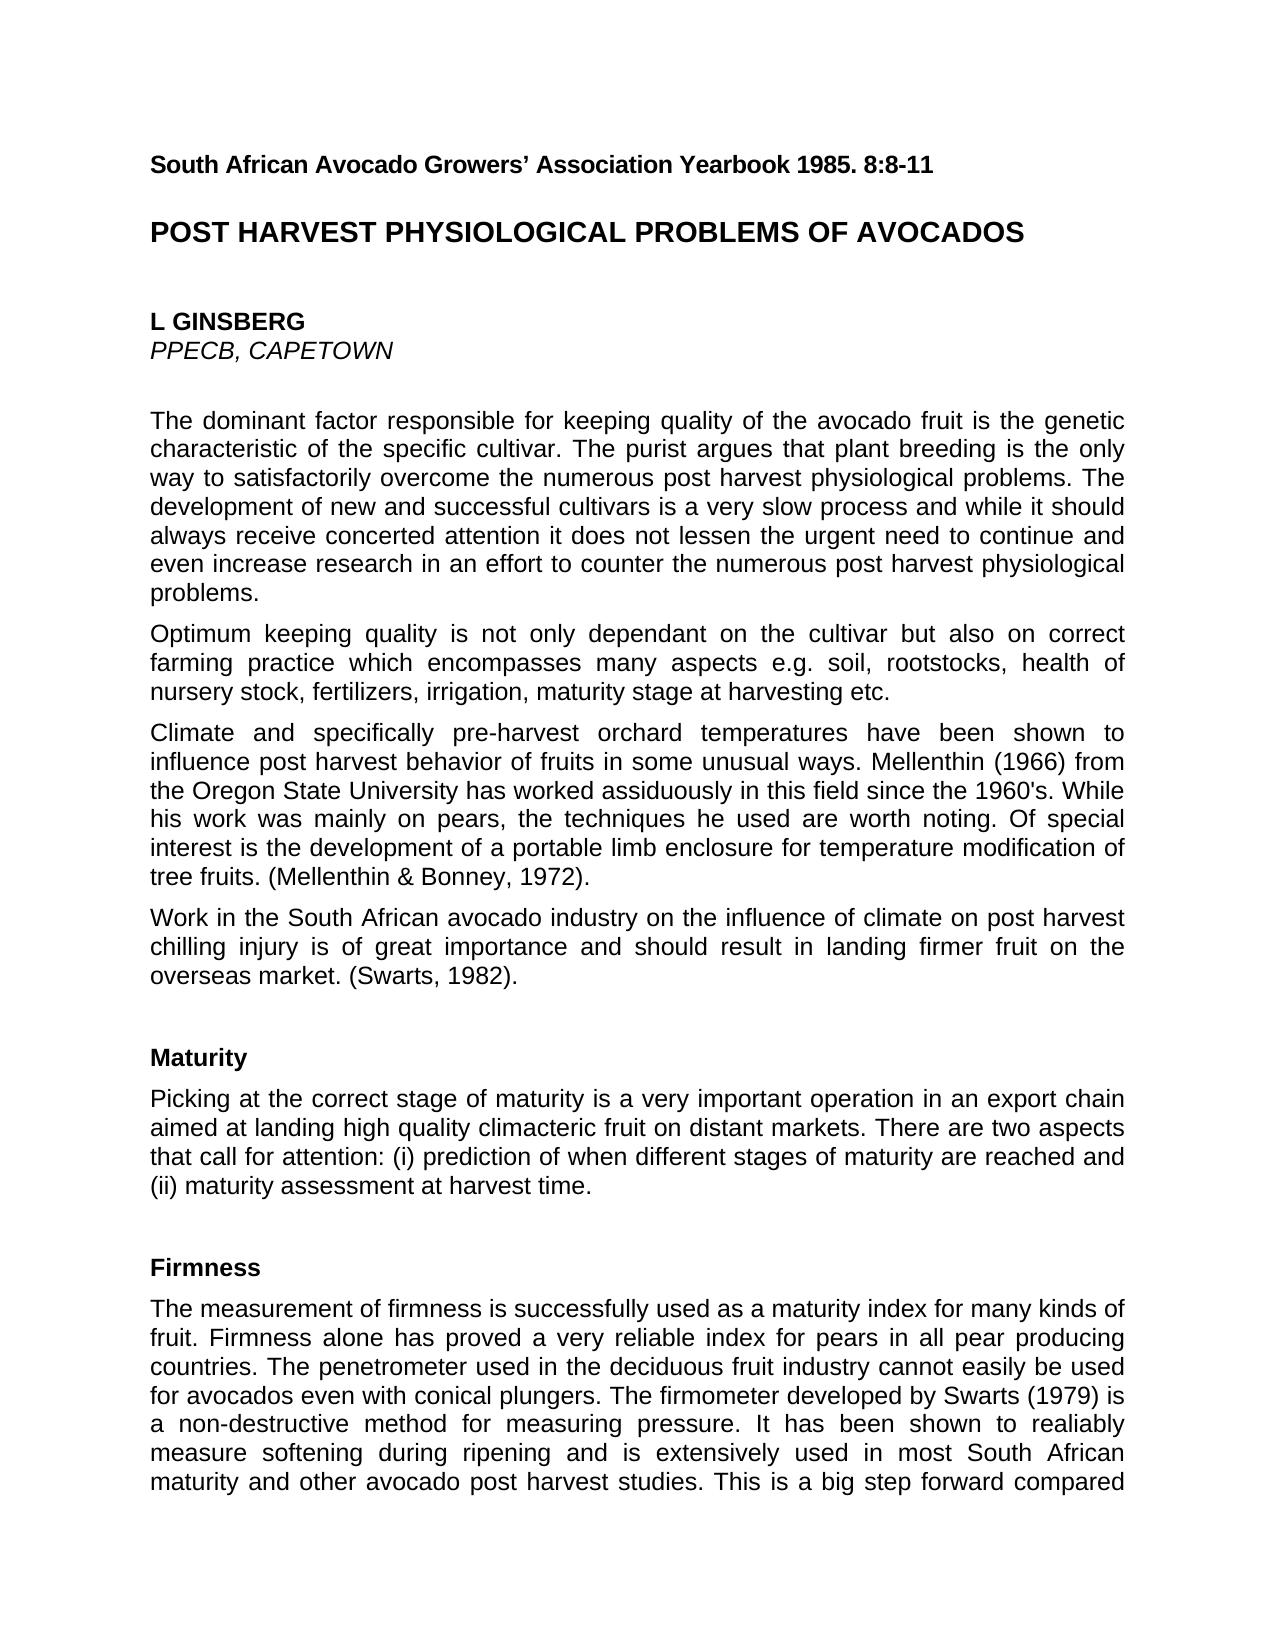 Post Harvest Physiological Problems of Avocados